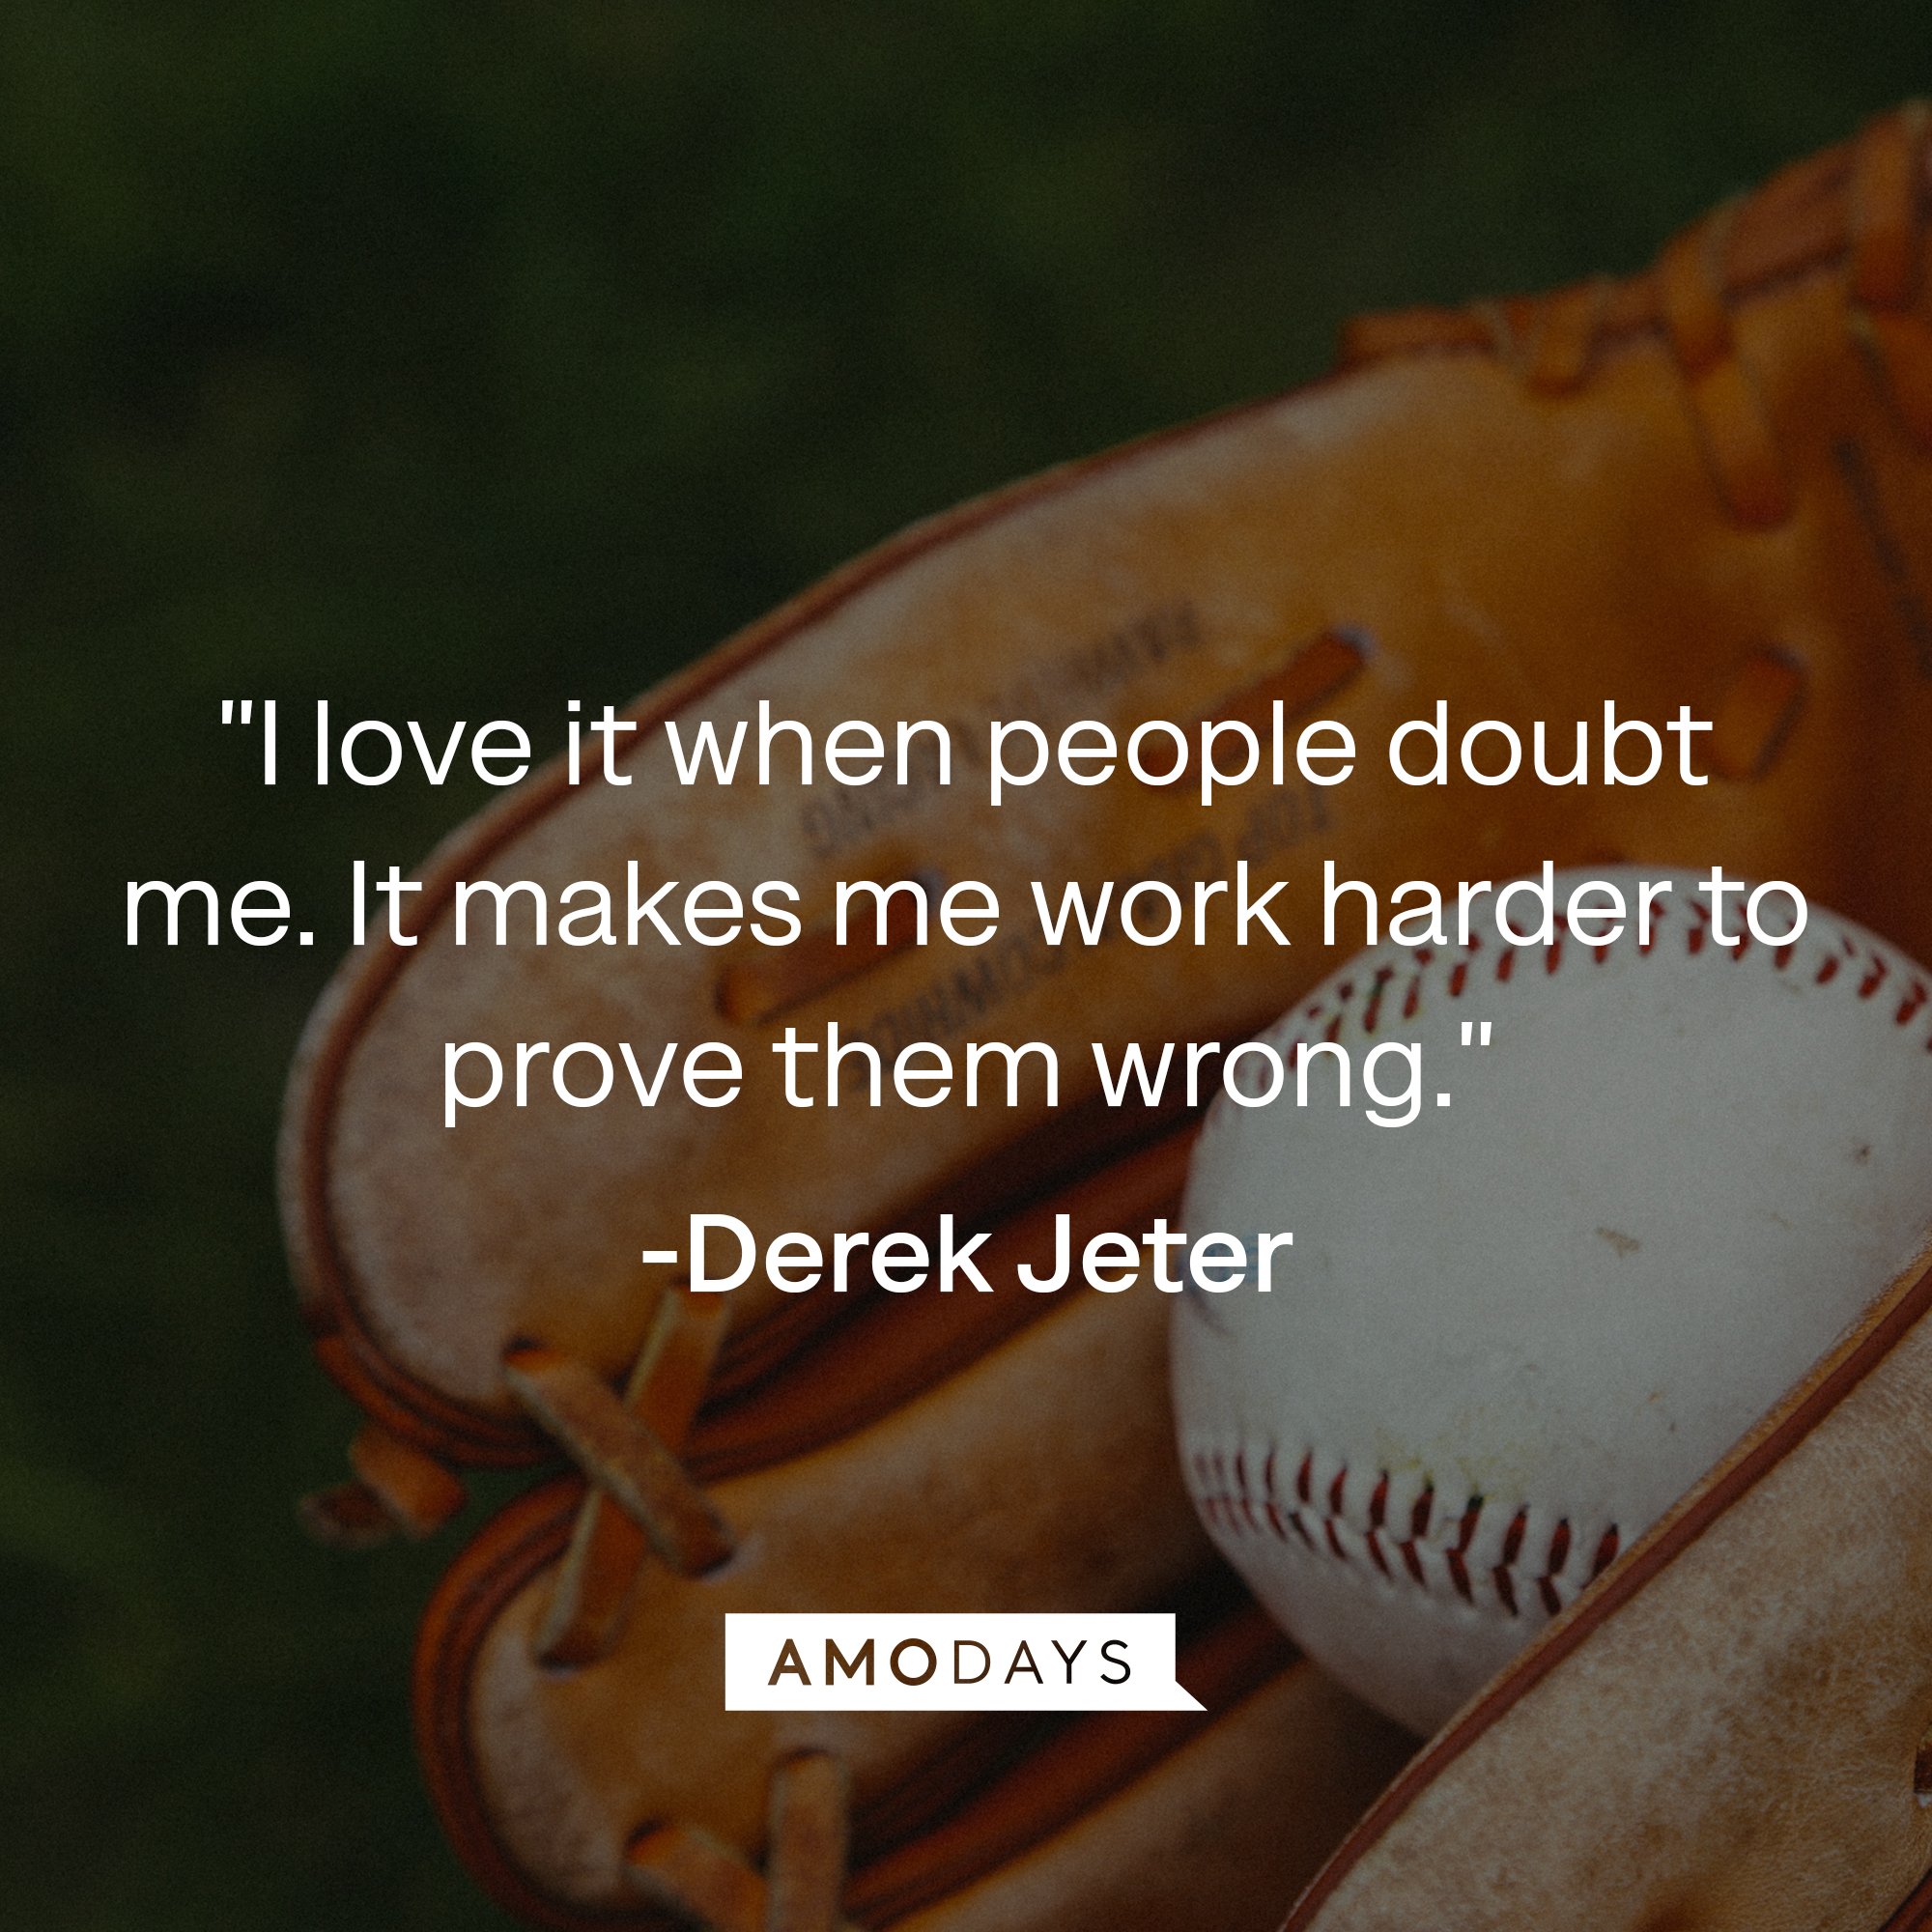 Derek Jeter's quote: "I love it when people doubt me. It makes me work harder to prove them wrong." | Image: AmoDays